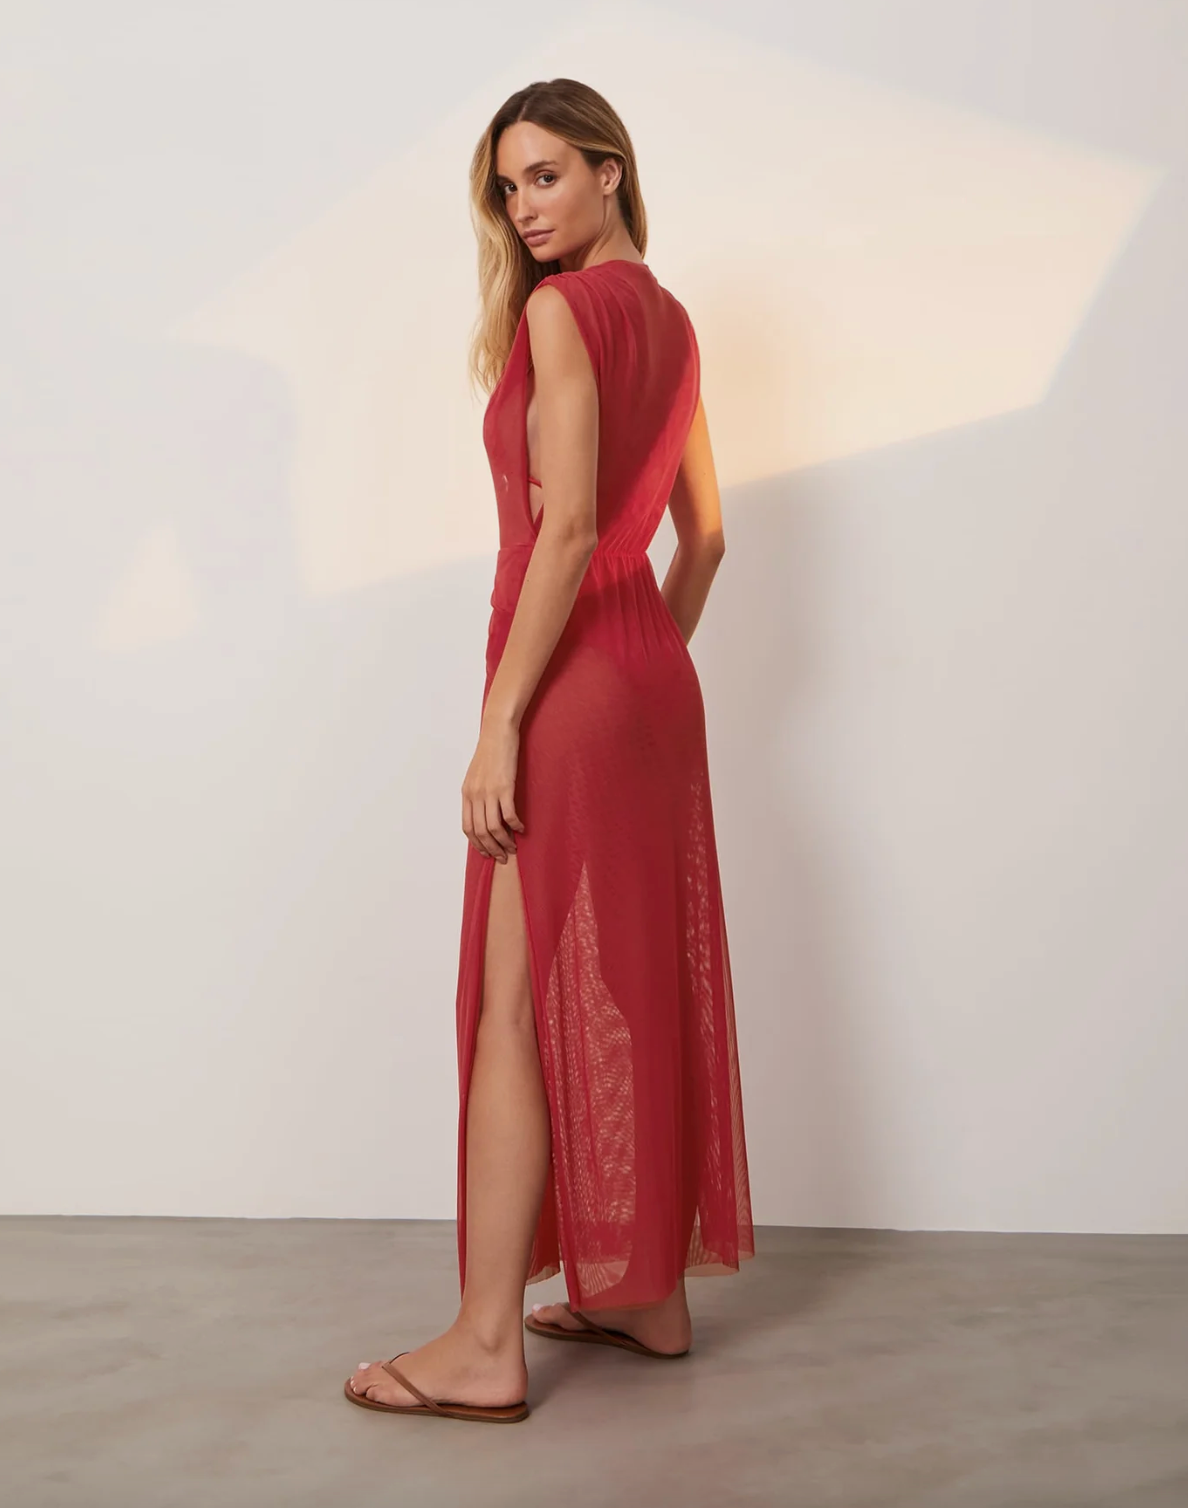 Vix Solid Cindy Long Coverup in Red